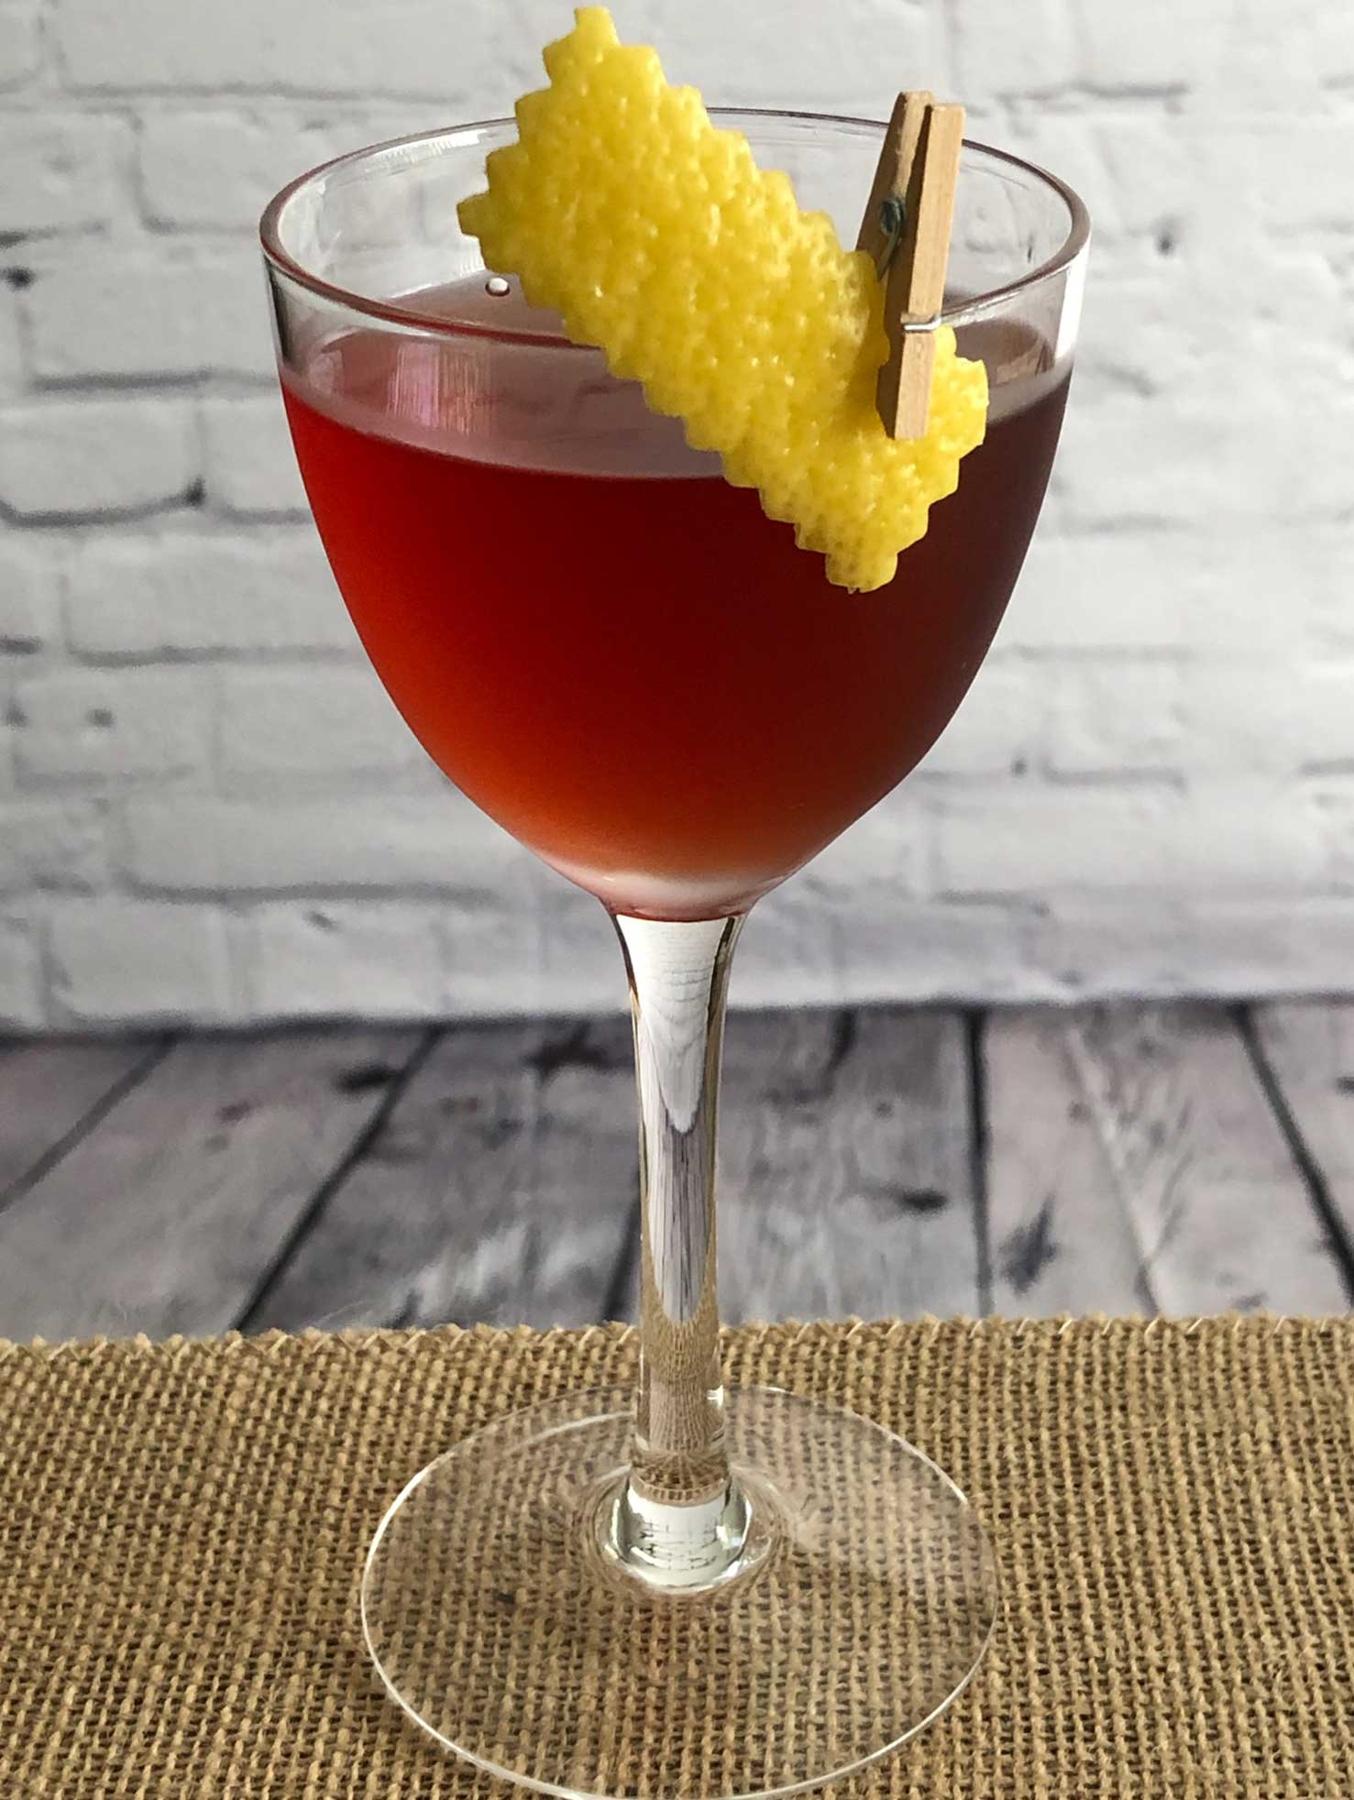 An example of the Cold Byrrrrh, the mixed drink (drink), by John Wabeck, Poulet Bleu and DeShantz, Pittsburgh, featuring Hayman’s London Dry Gin, Byrrh Grand Quinquina, orange bitters, and lemon twist; photo by Lee Edwards